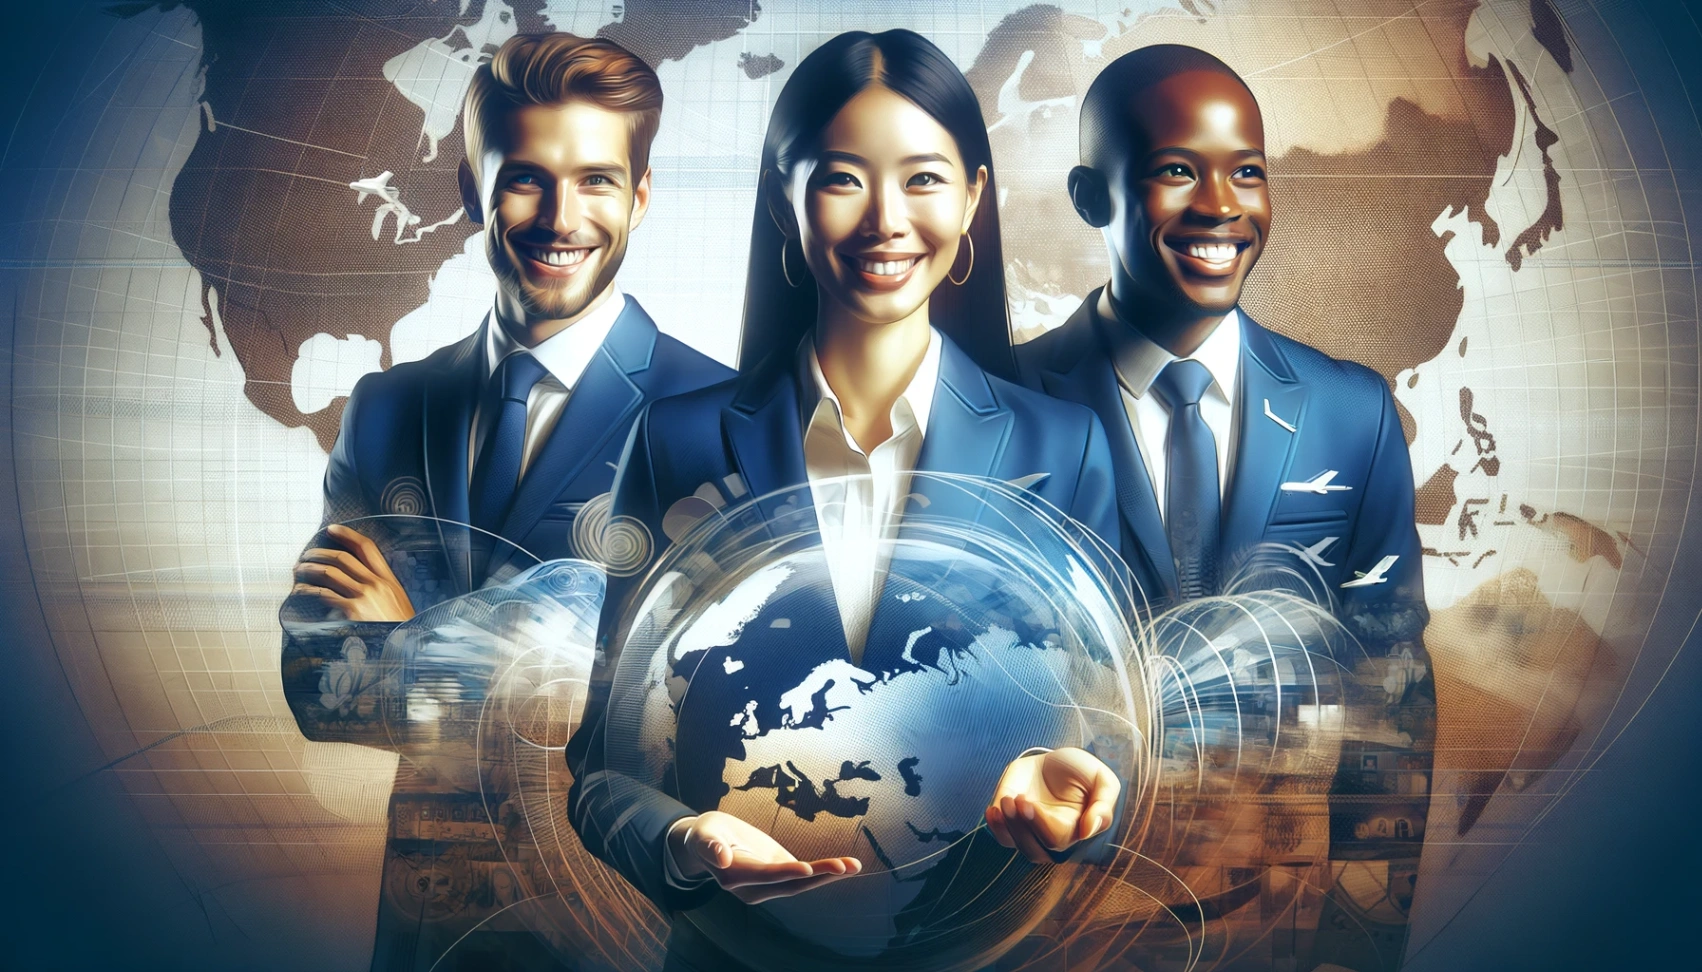 International Airlines Group Careers: Learn How to Apply Here